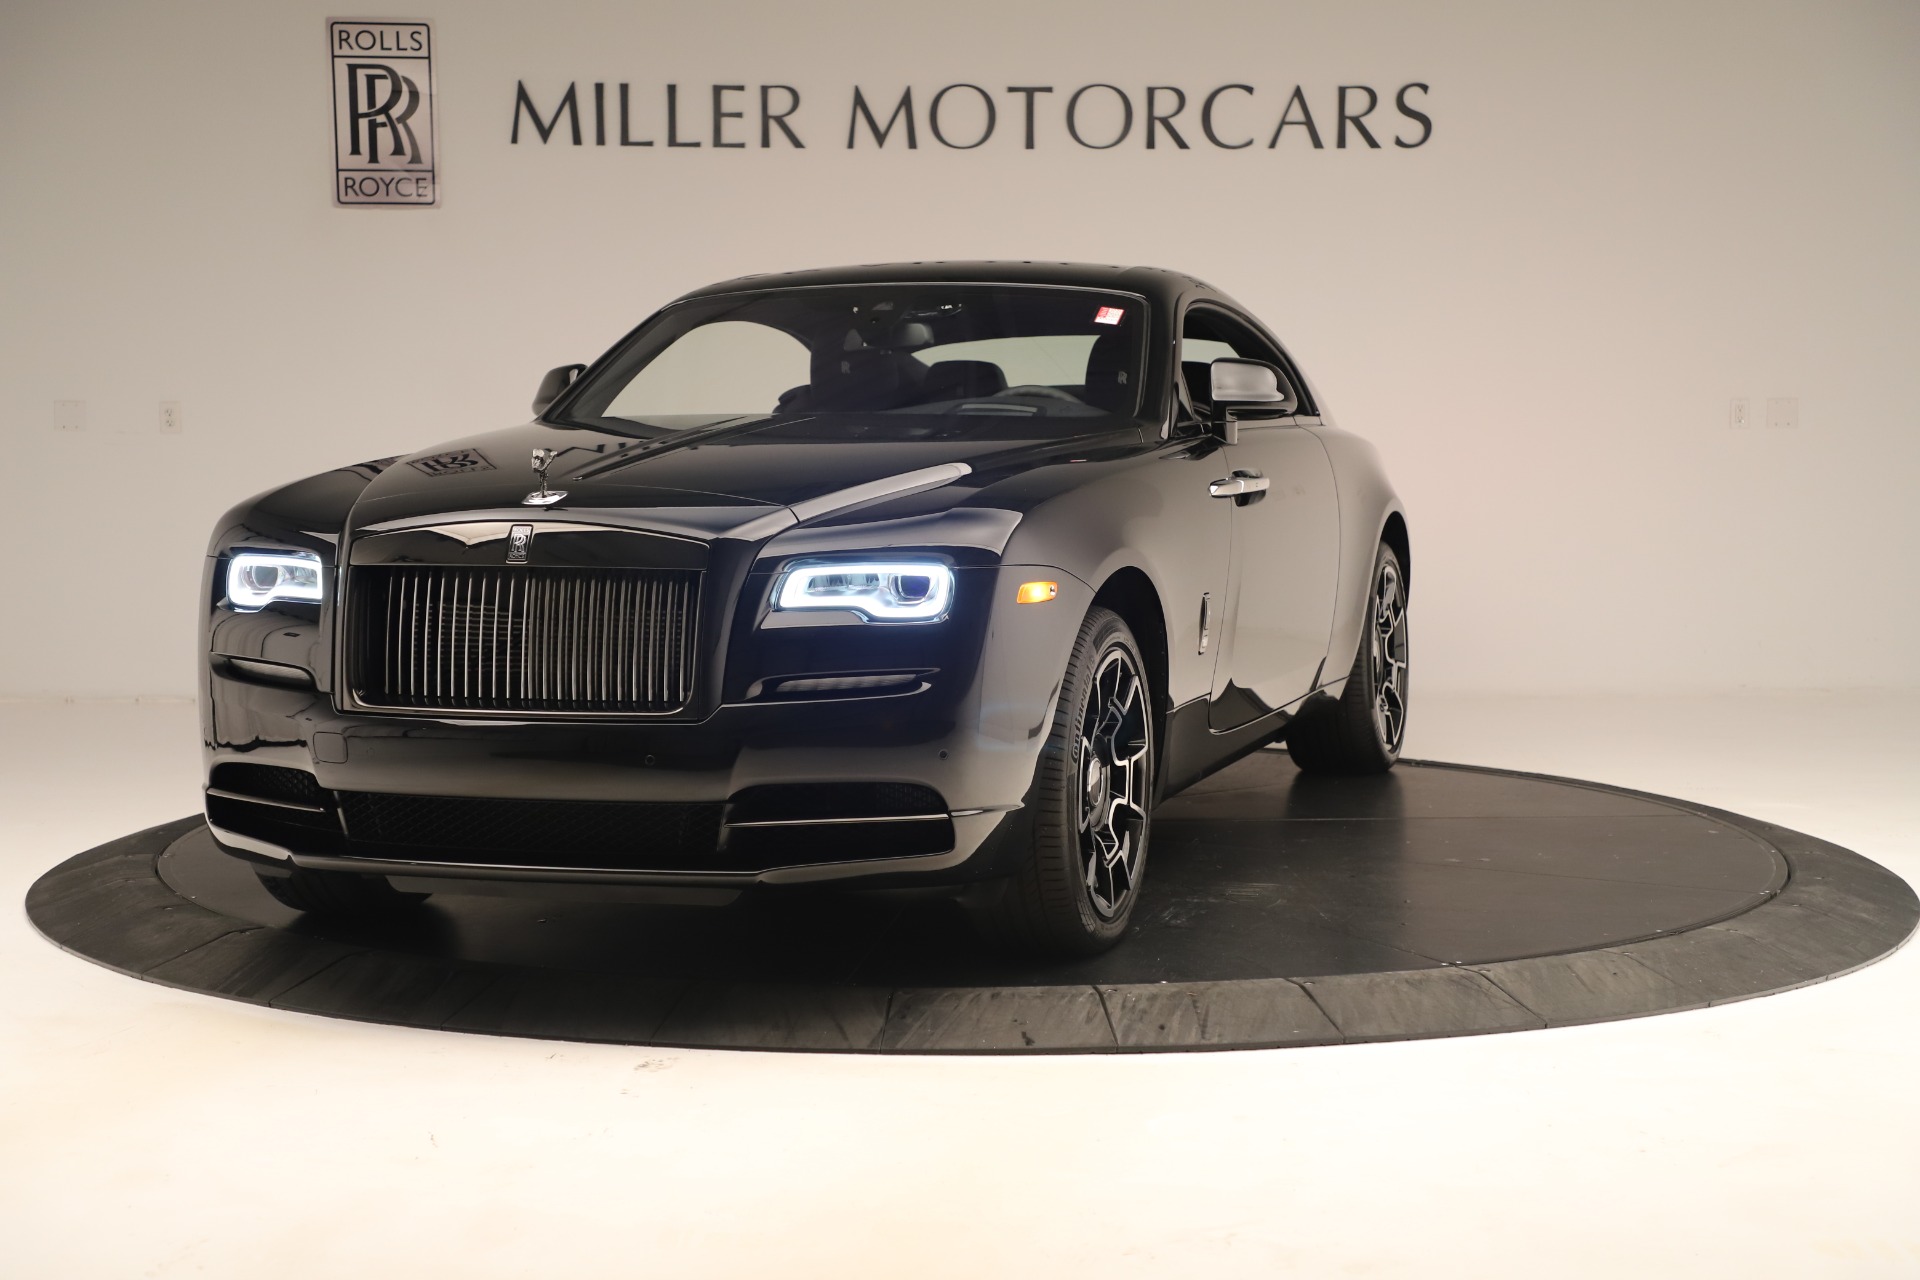 New 2020 Rolls Royce Wraith Black Badge For Sale Special Pricing